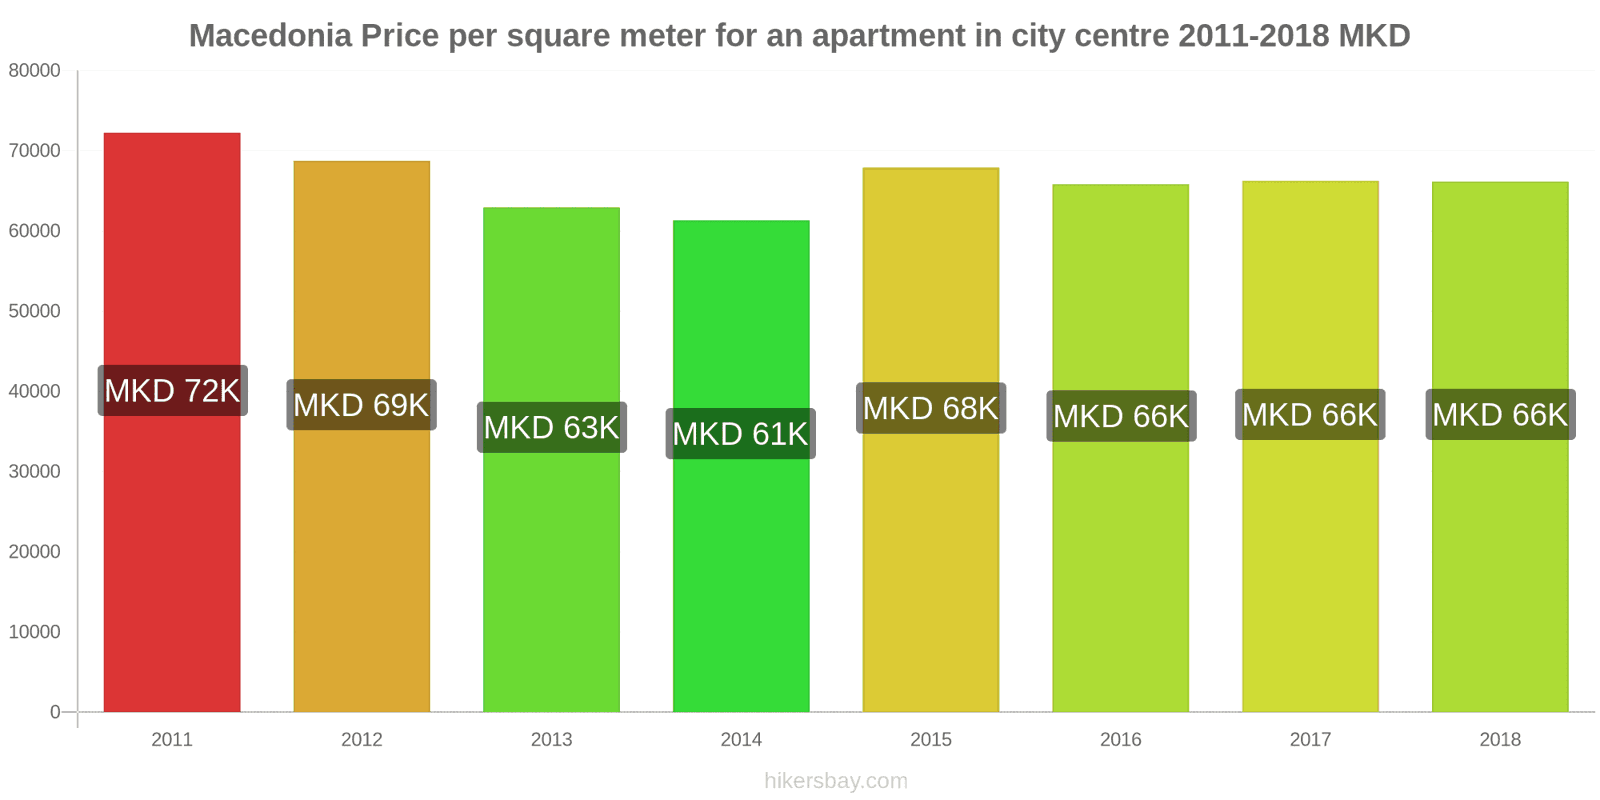 Macedonia price changes Price per square meter for an apartment in the city center hikersbay.com